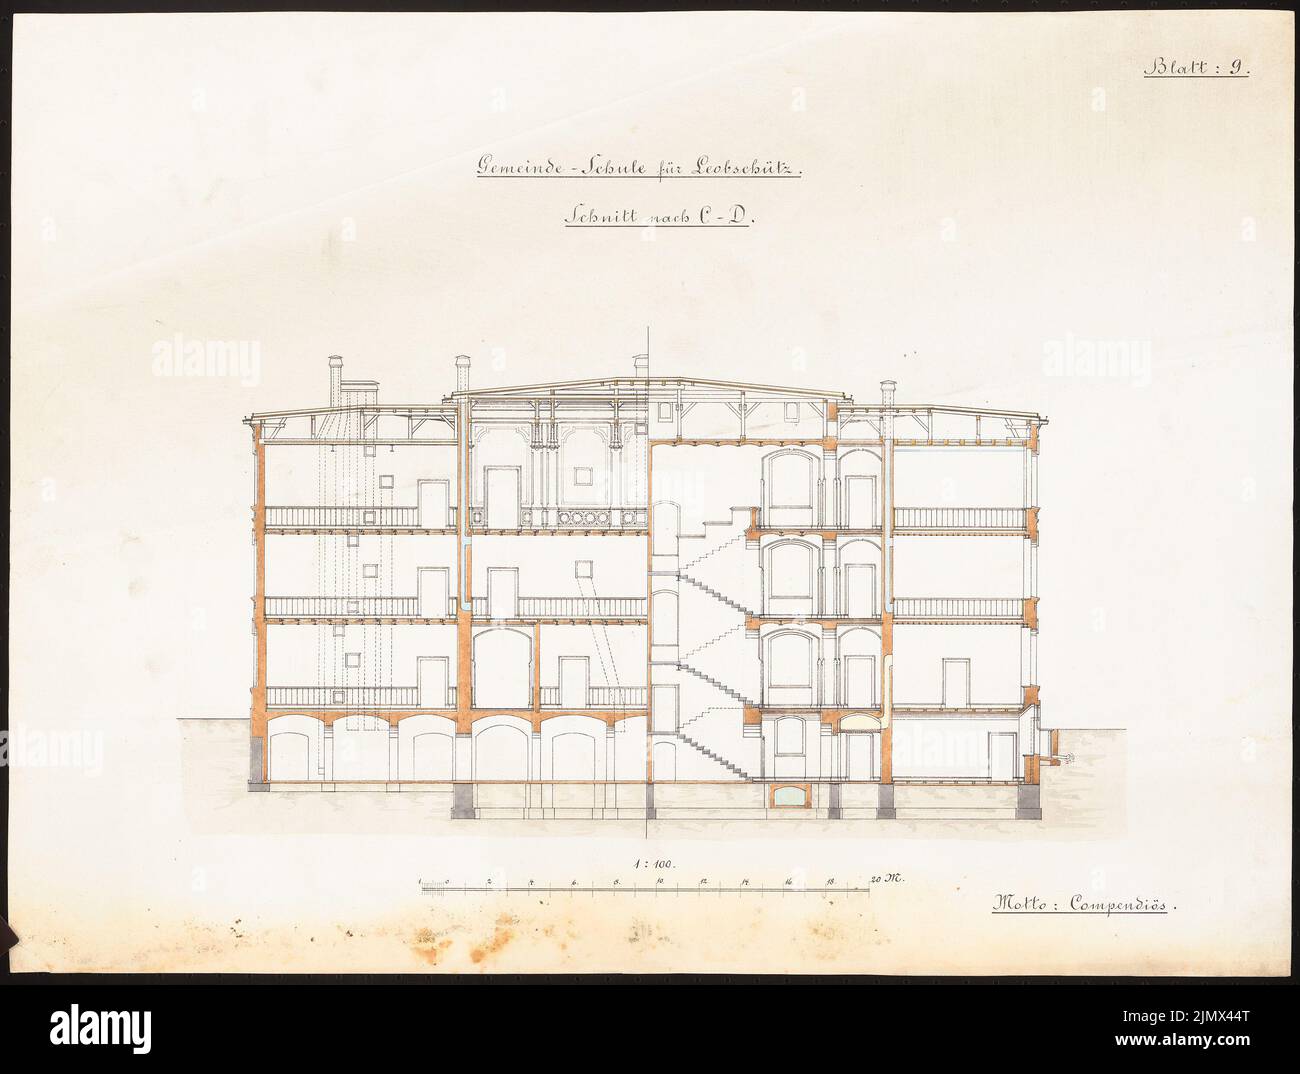 Unknown architect, not yet recorded: competition designs (without date): not yet recorded. Material/technology N.N. Captured, 46.1 x 60.9 cm (including scan edges) N.N. : Gemeindeschule für Leobschütz Stock Photo